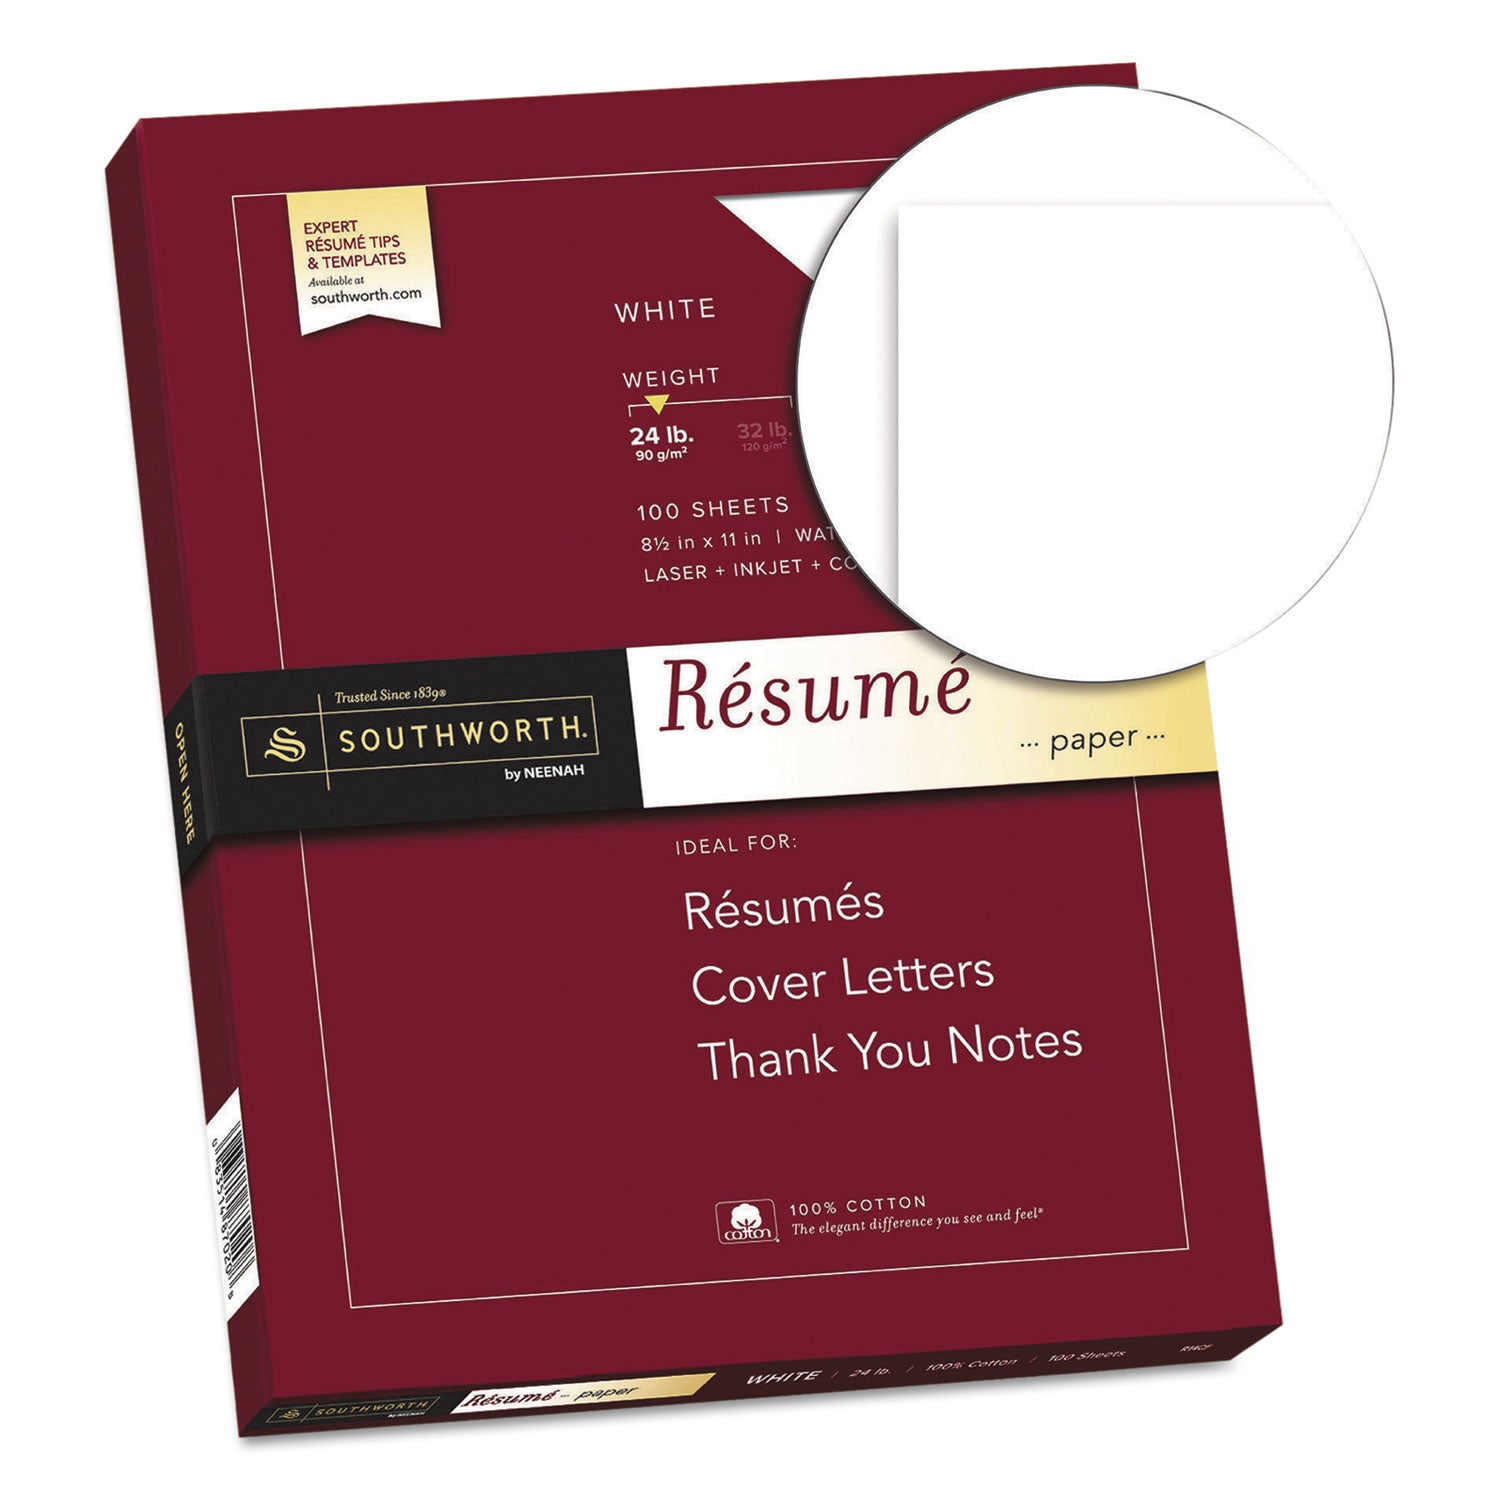 100% Cotton Resume Paper, 95 Bright, 24 lb Bond Weight, 8.5 x 11, White, 100/Pack - 